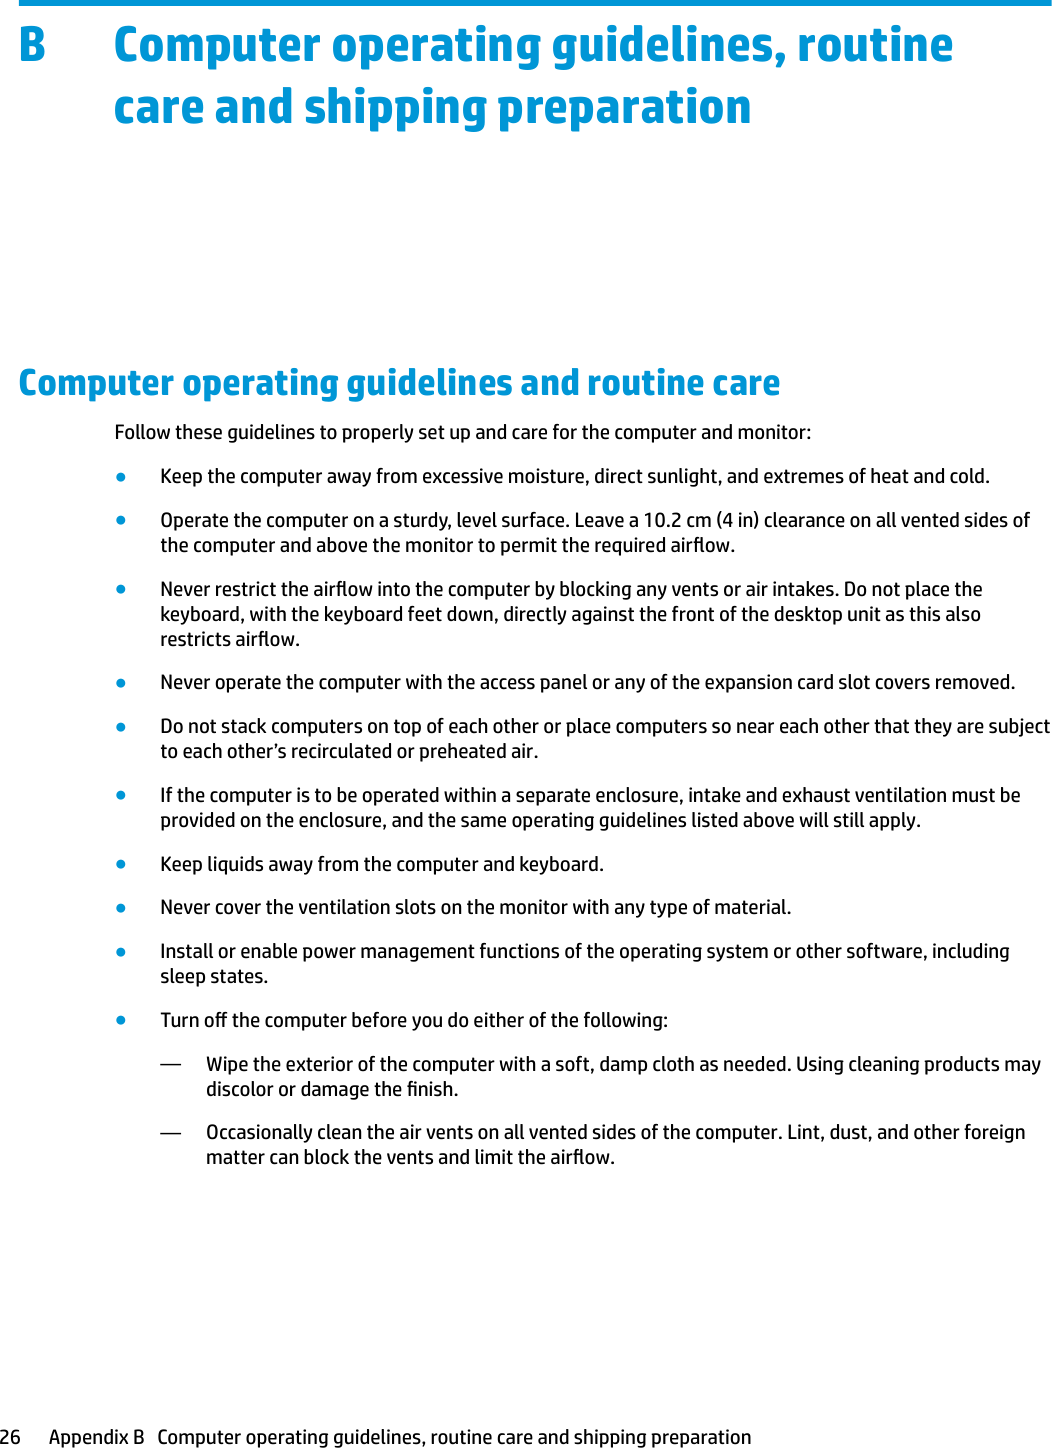 B Computer operating guidelines, routine care and shipping preparationComputer operating guidelines and routine careFollow these guidelines to properly set up and care for the computer and monitor:●Keep the computer away from excessive moisture, direct sunlight, and extremes of heat and cold.●Operate the computer on a sturdy, level surface. Leave a 10.2 cm (4 in) clearance on all vented sides of the computer and above the monitor to permit the required airow.●Never restrict the airow into the computer by blocking any vents or air intakes. Do not place the keyboard, with the keyboard feet down, directly against the front of the desktop unit as this also restricts airow.●Never operate the computer with the access panel or any of the expansion card slot covers removed.●Do not stack computers on top of each other or place computers so near each other that they are subject to each other’s recirculated or preheated air.●If the computer is to be operated within a separate enclosure, intake and exhaust ventilation must be provided on the enclosure, and the same operating guidelines listed above will still apply.●Keep liquids away from the computer and keyboard.●Never cover the ventilation slots on the monitor with any type of material.●Install or enable power management functions of the operating system or other software, including sleep states.●Turn o the computer before you do either of the following:—Wipe the exterior of the computer with a soft, damp cloth as needed. Using cleaning products may discolor or damage the nish.—Occasionally clean the air vents on all vented sides of the computer. Lint, dust, and other foreign matter can block the vents and limit the airow.26 Appendix B   Computer operating guidelines, routine care and shipping preparation